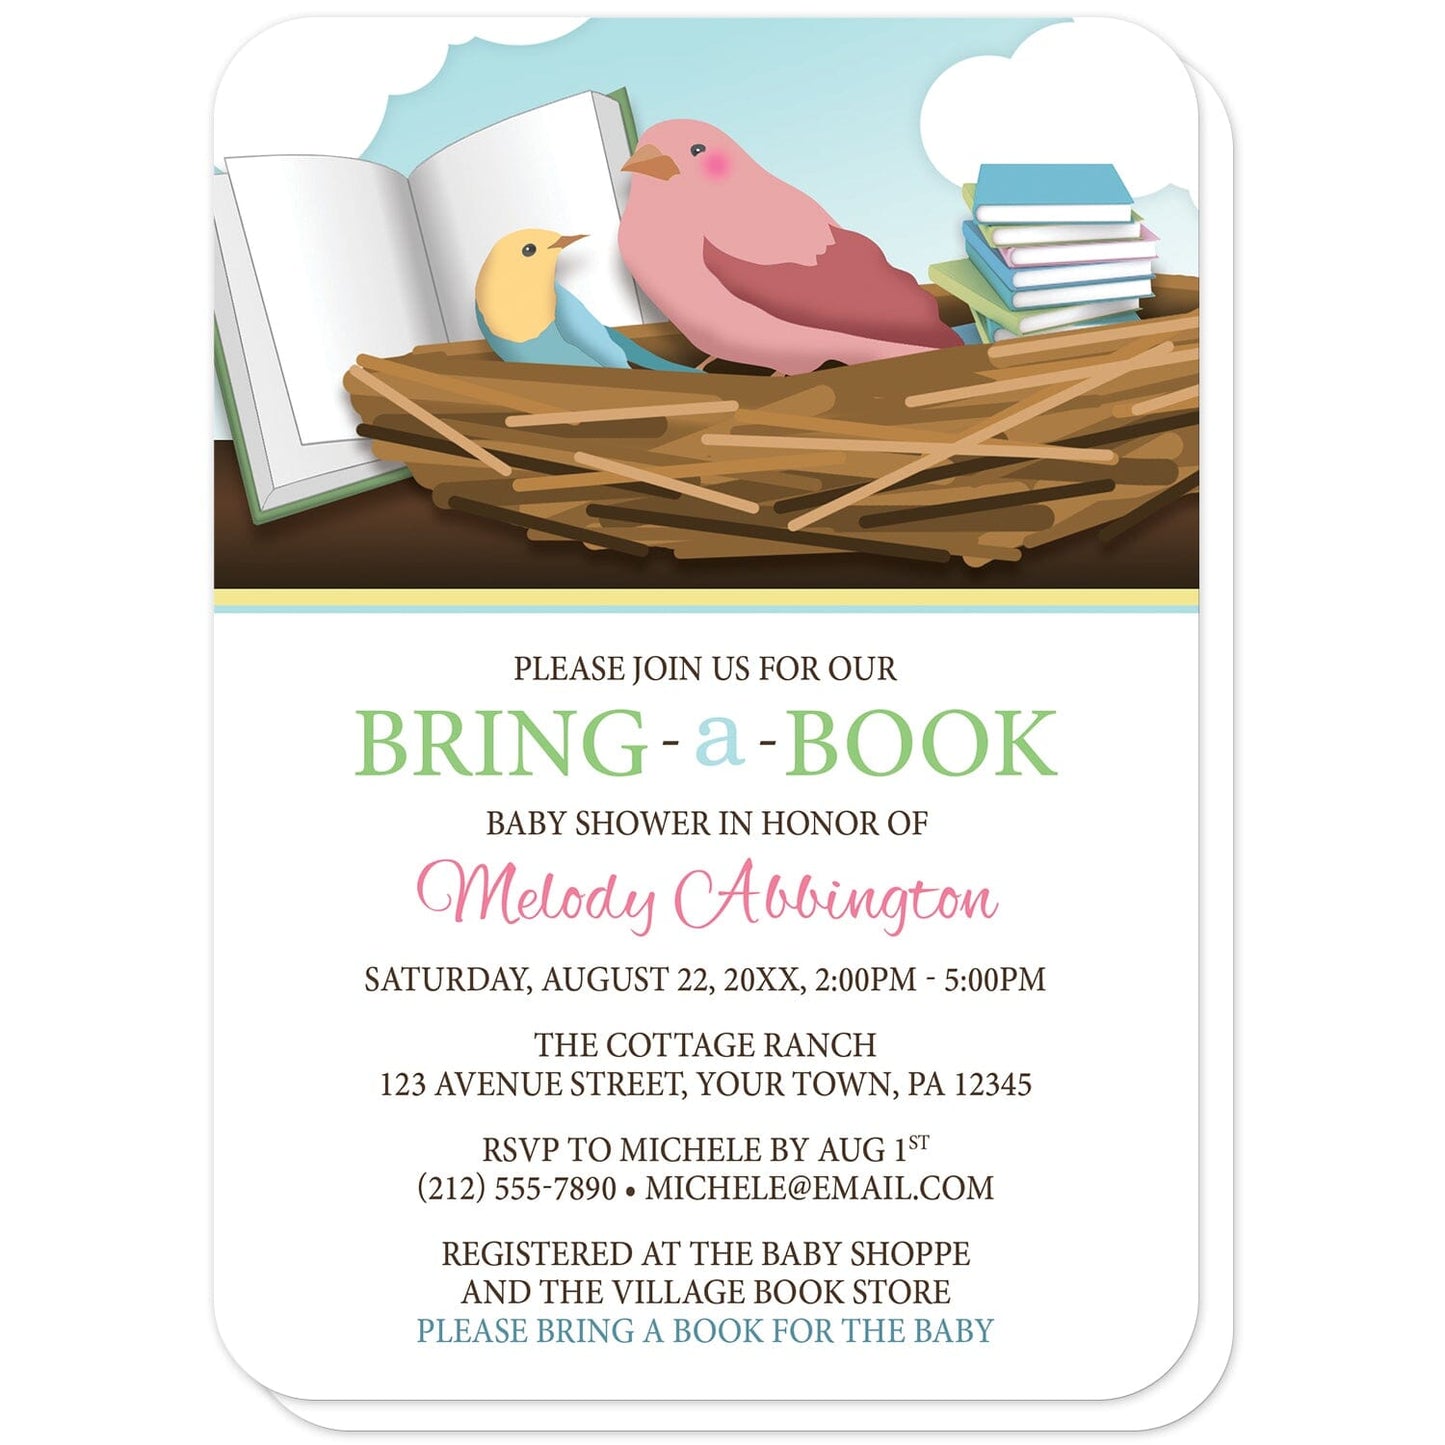 Bird Nest Bring a Book Baby Shower Invitations (with rounded corners) at Artistically Invited. Cute bird nest bring a book baby shower invitations with an illustration of a mommy bird and baby bird in a nest, reading a large open book together. A tall stack of books sits in the nest beside them. Your personalized baby shower celebration details are custom printed in green, blue, pink, and brown over white. 